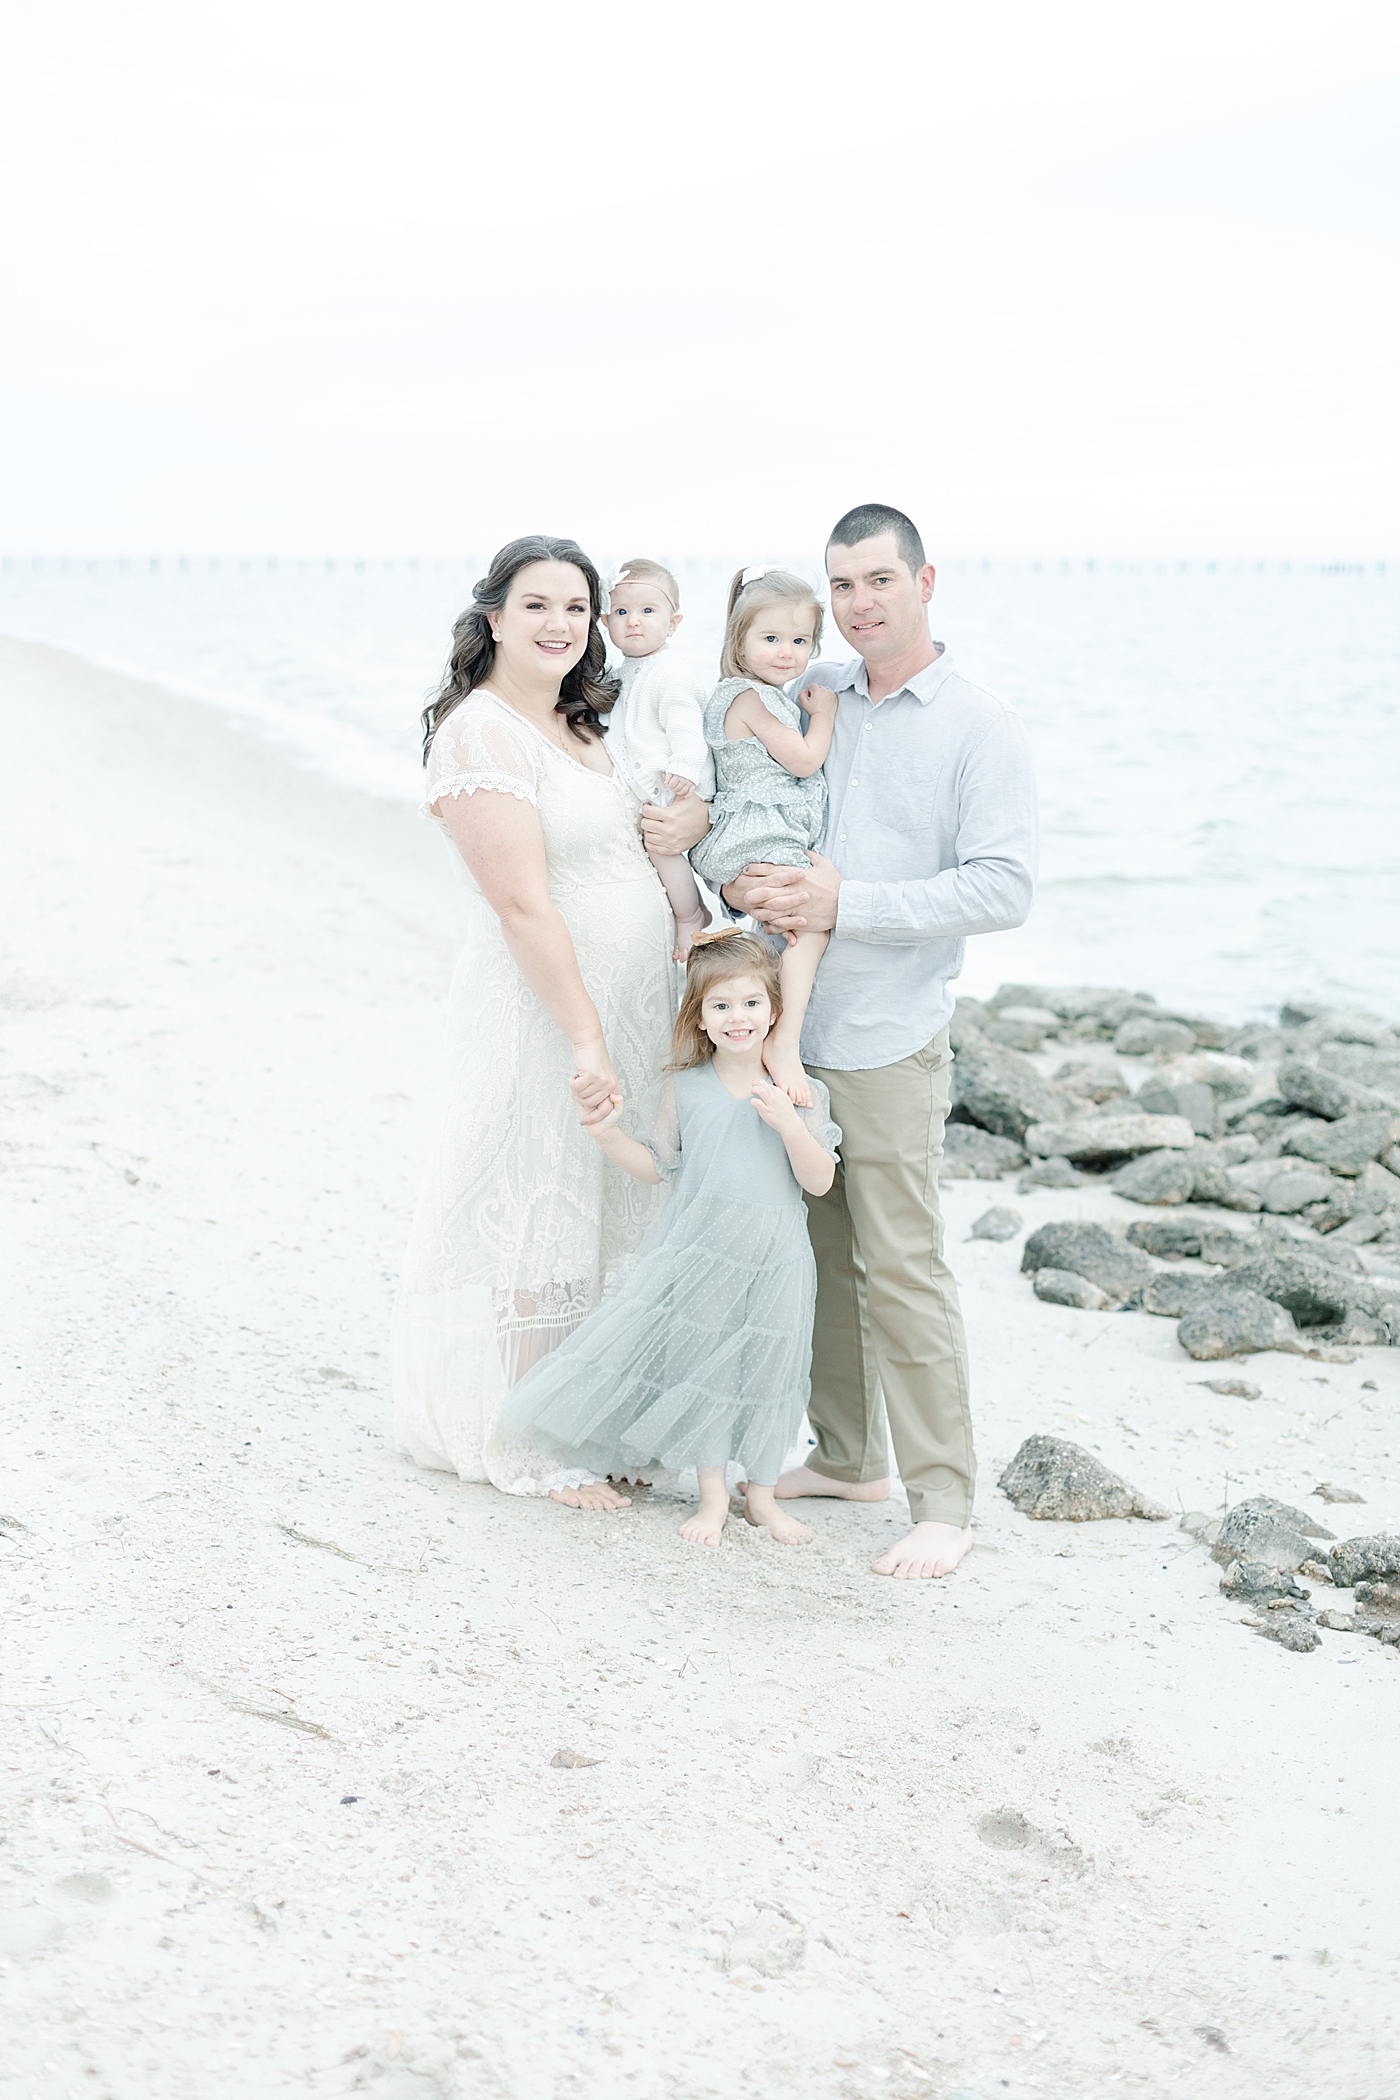 Family in white and blue standing near rocks on the beach | Photo by Little Sunshine Photography